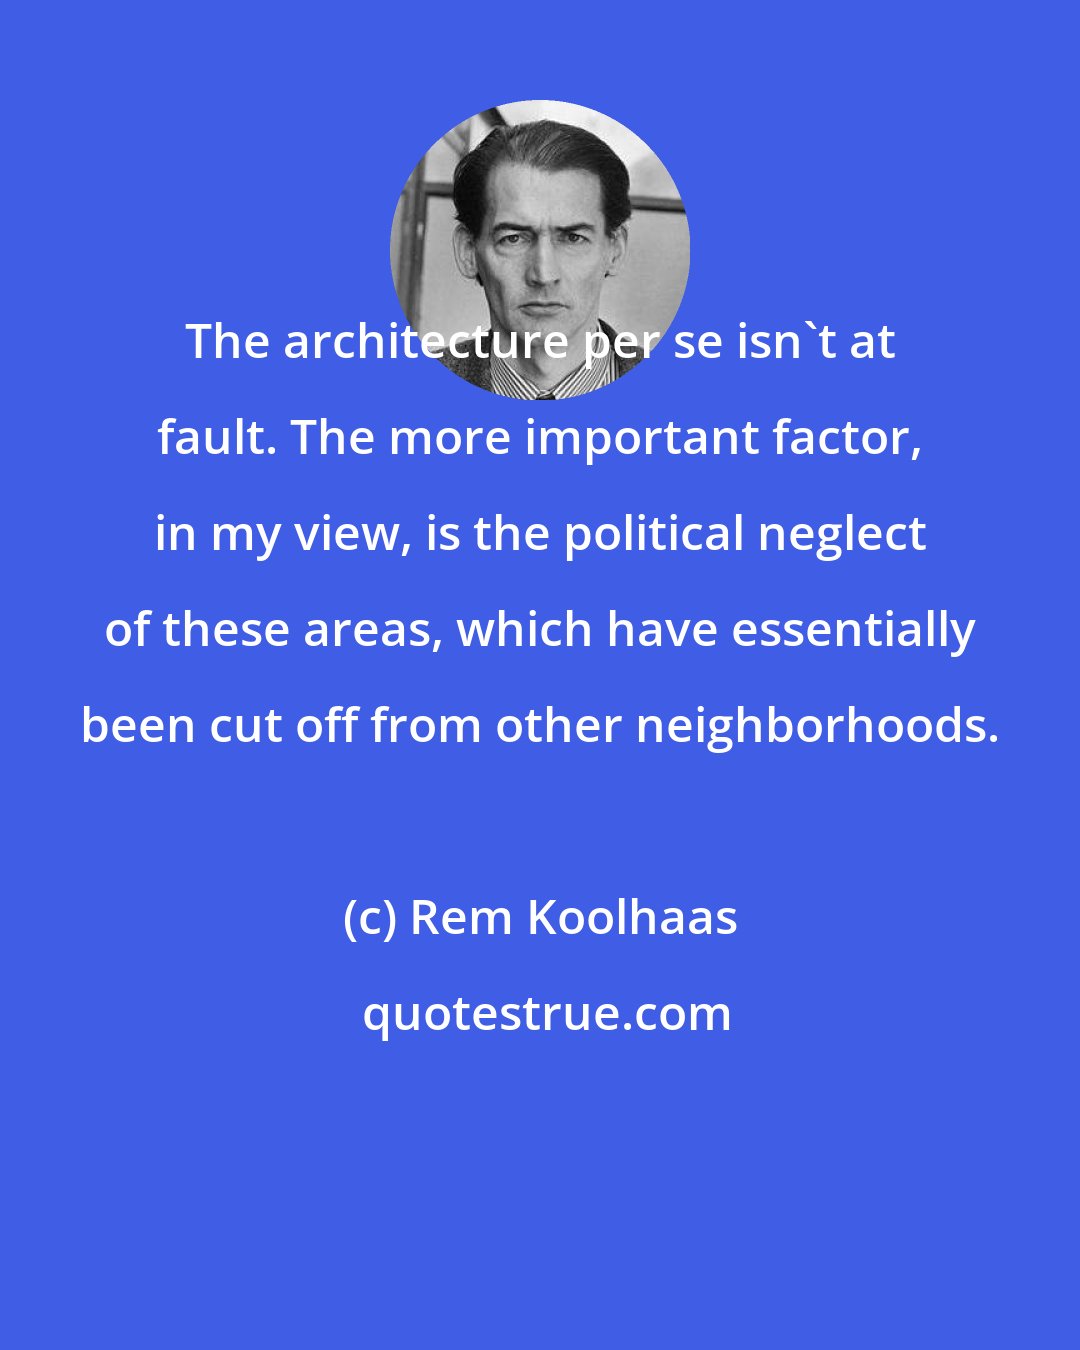 Rem Koolhaas: The architecture per se isn't at fault. The more important factor, in my view, is the political neglect of these areas, which have essentially been cut off from other neighborhoods.